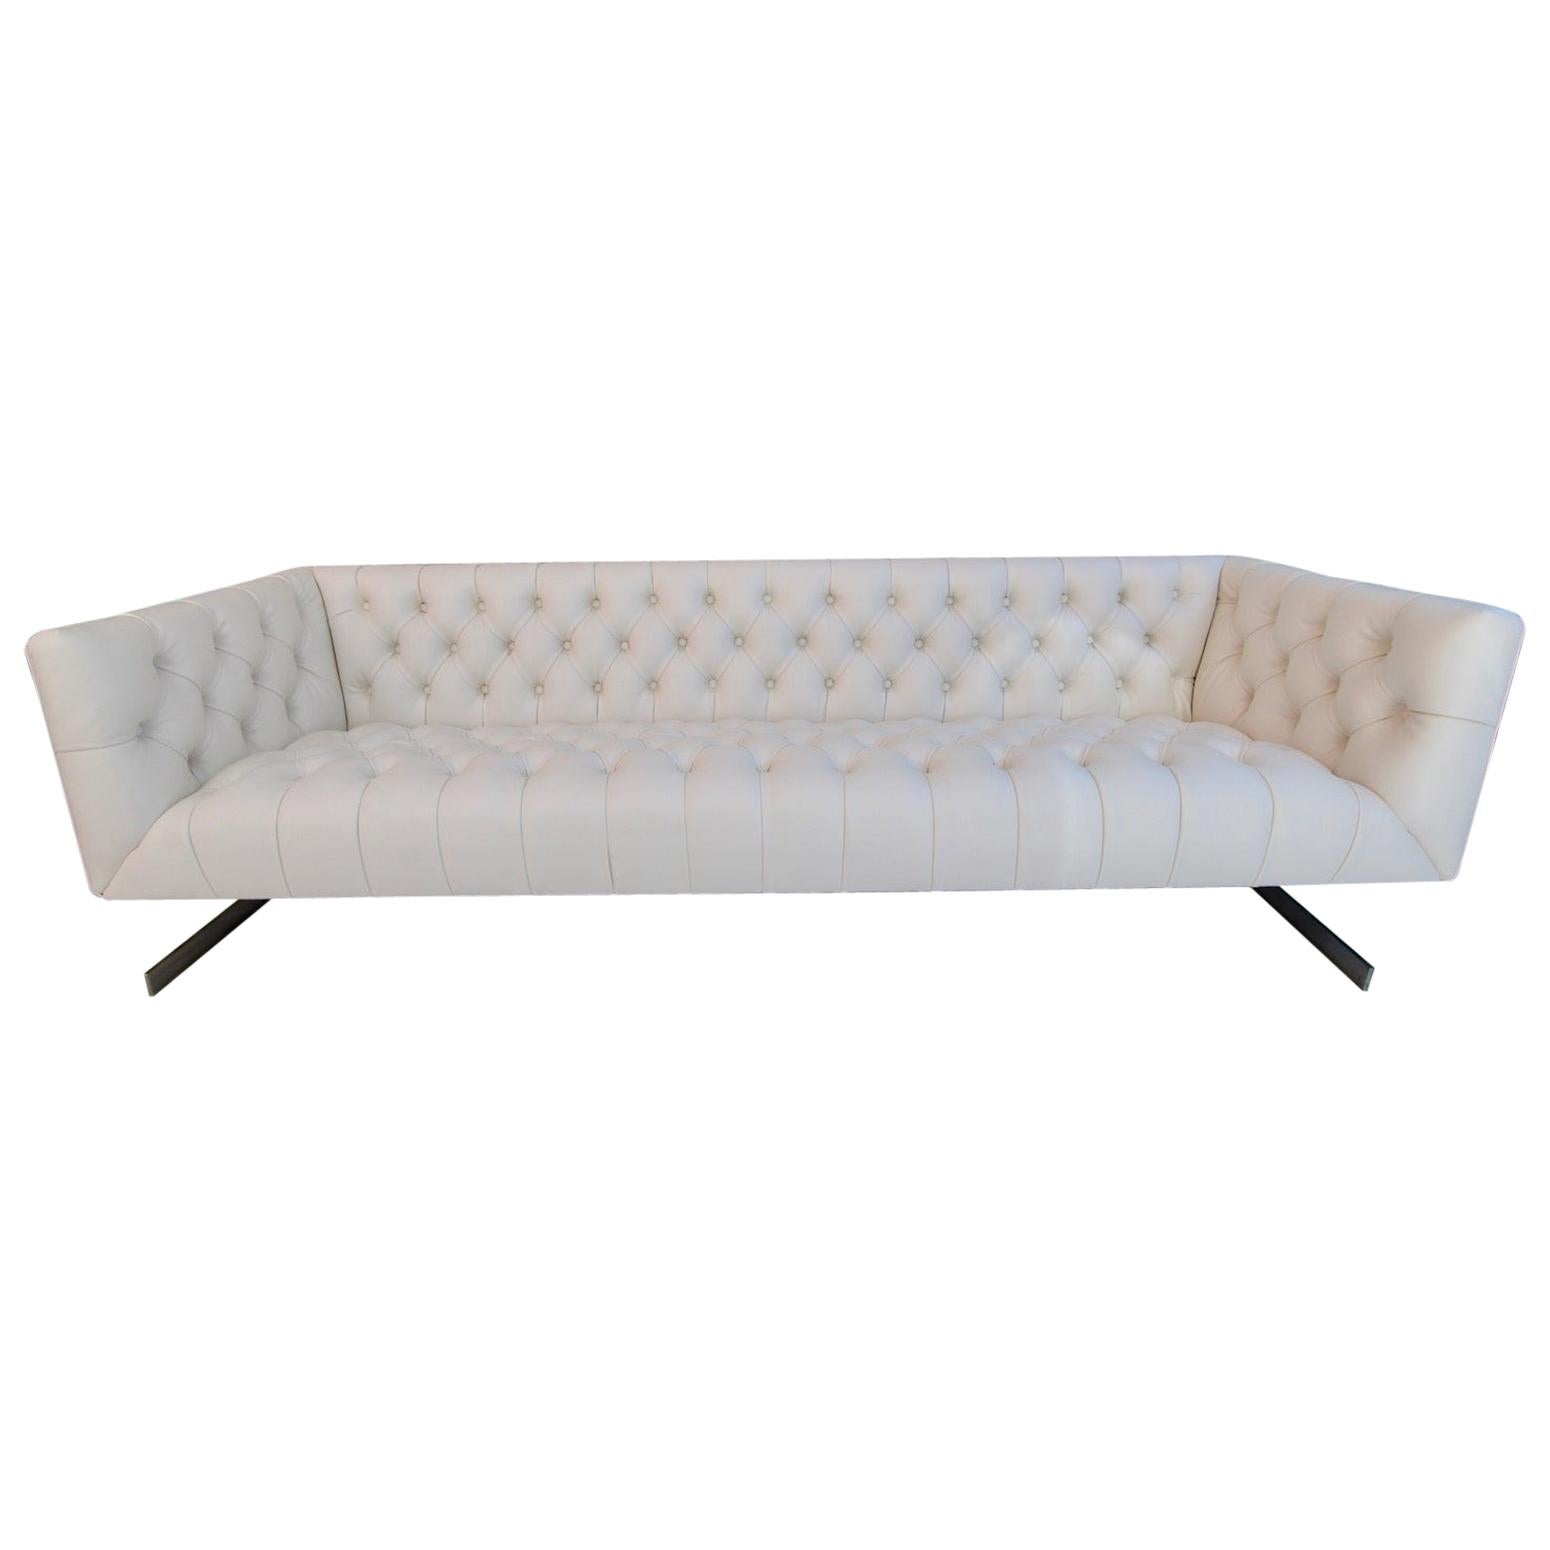 Rare and Sexy Large Sofa Cantilever Design Chesterfield Style